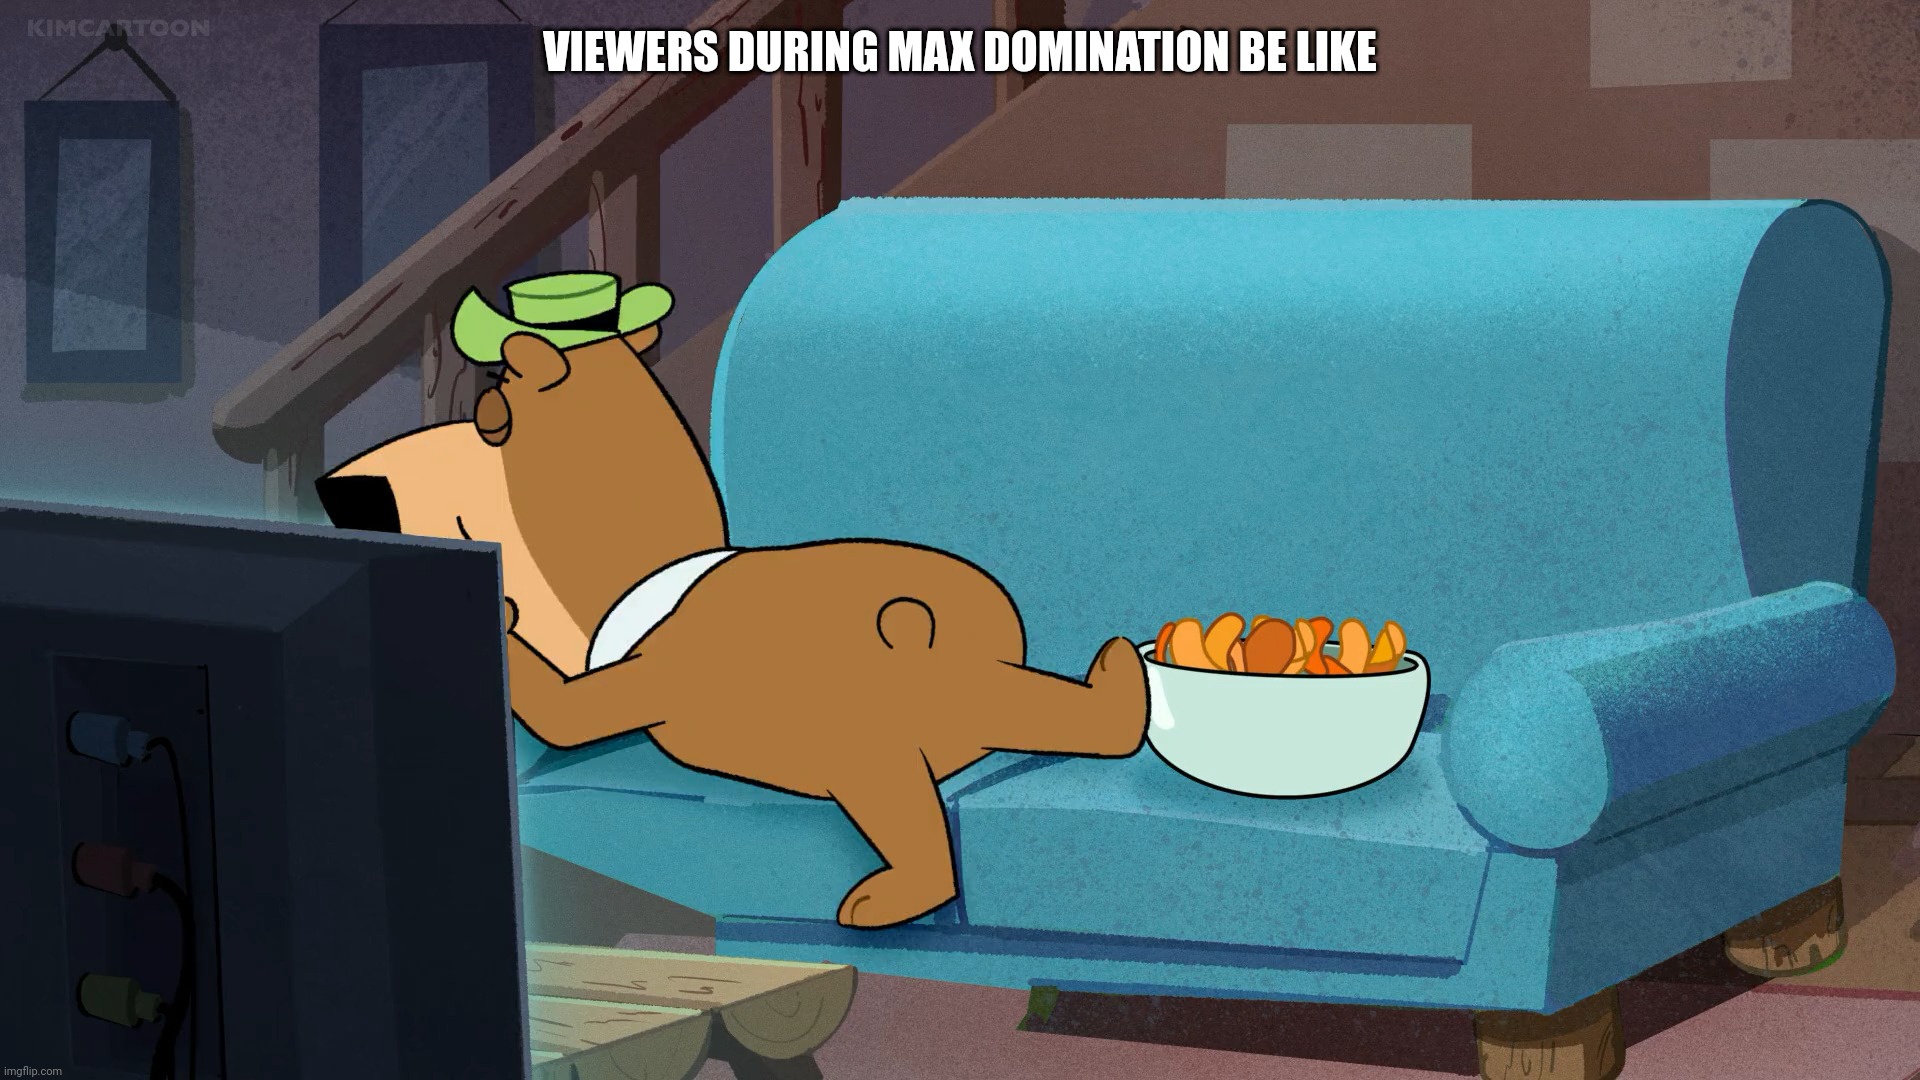 VIEWERS DURING MAX DOMINATION BE LIKE | image tagged in formula 1,championship,max,racing,open-wheel racing,domination | made w/ Imgflip meme maker